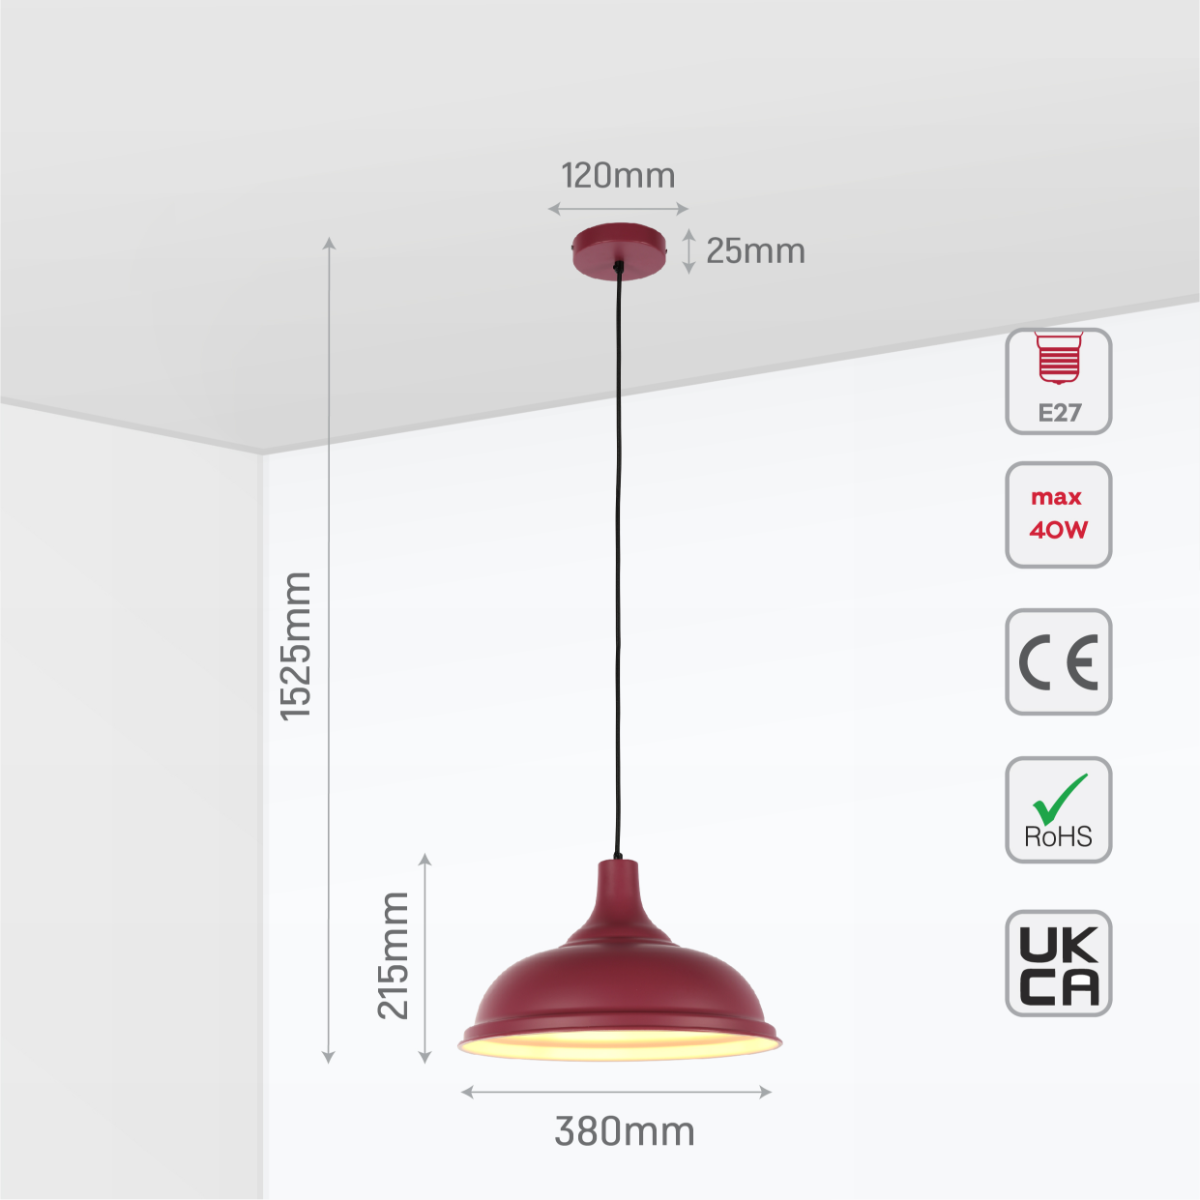 Size and certifications of Modern Step Pendant Light - 38cm Metal Shade in Varied Hues 150-19064